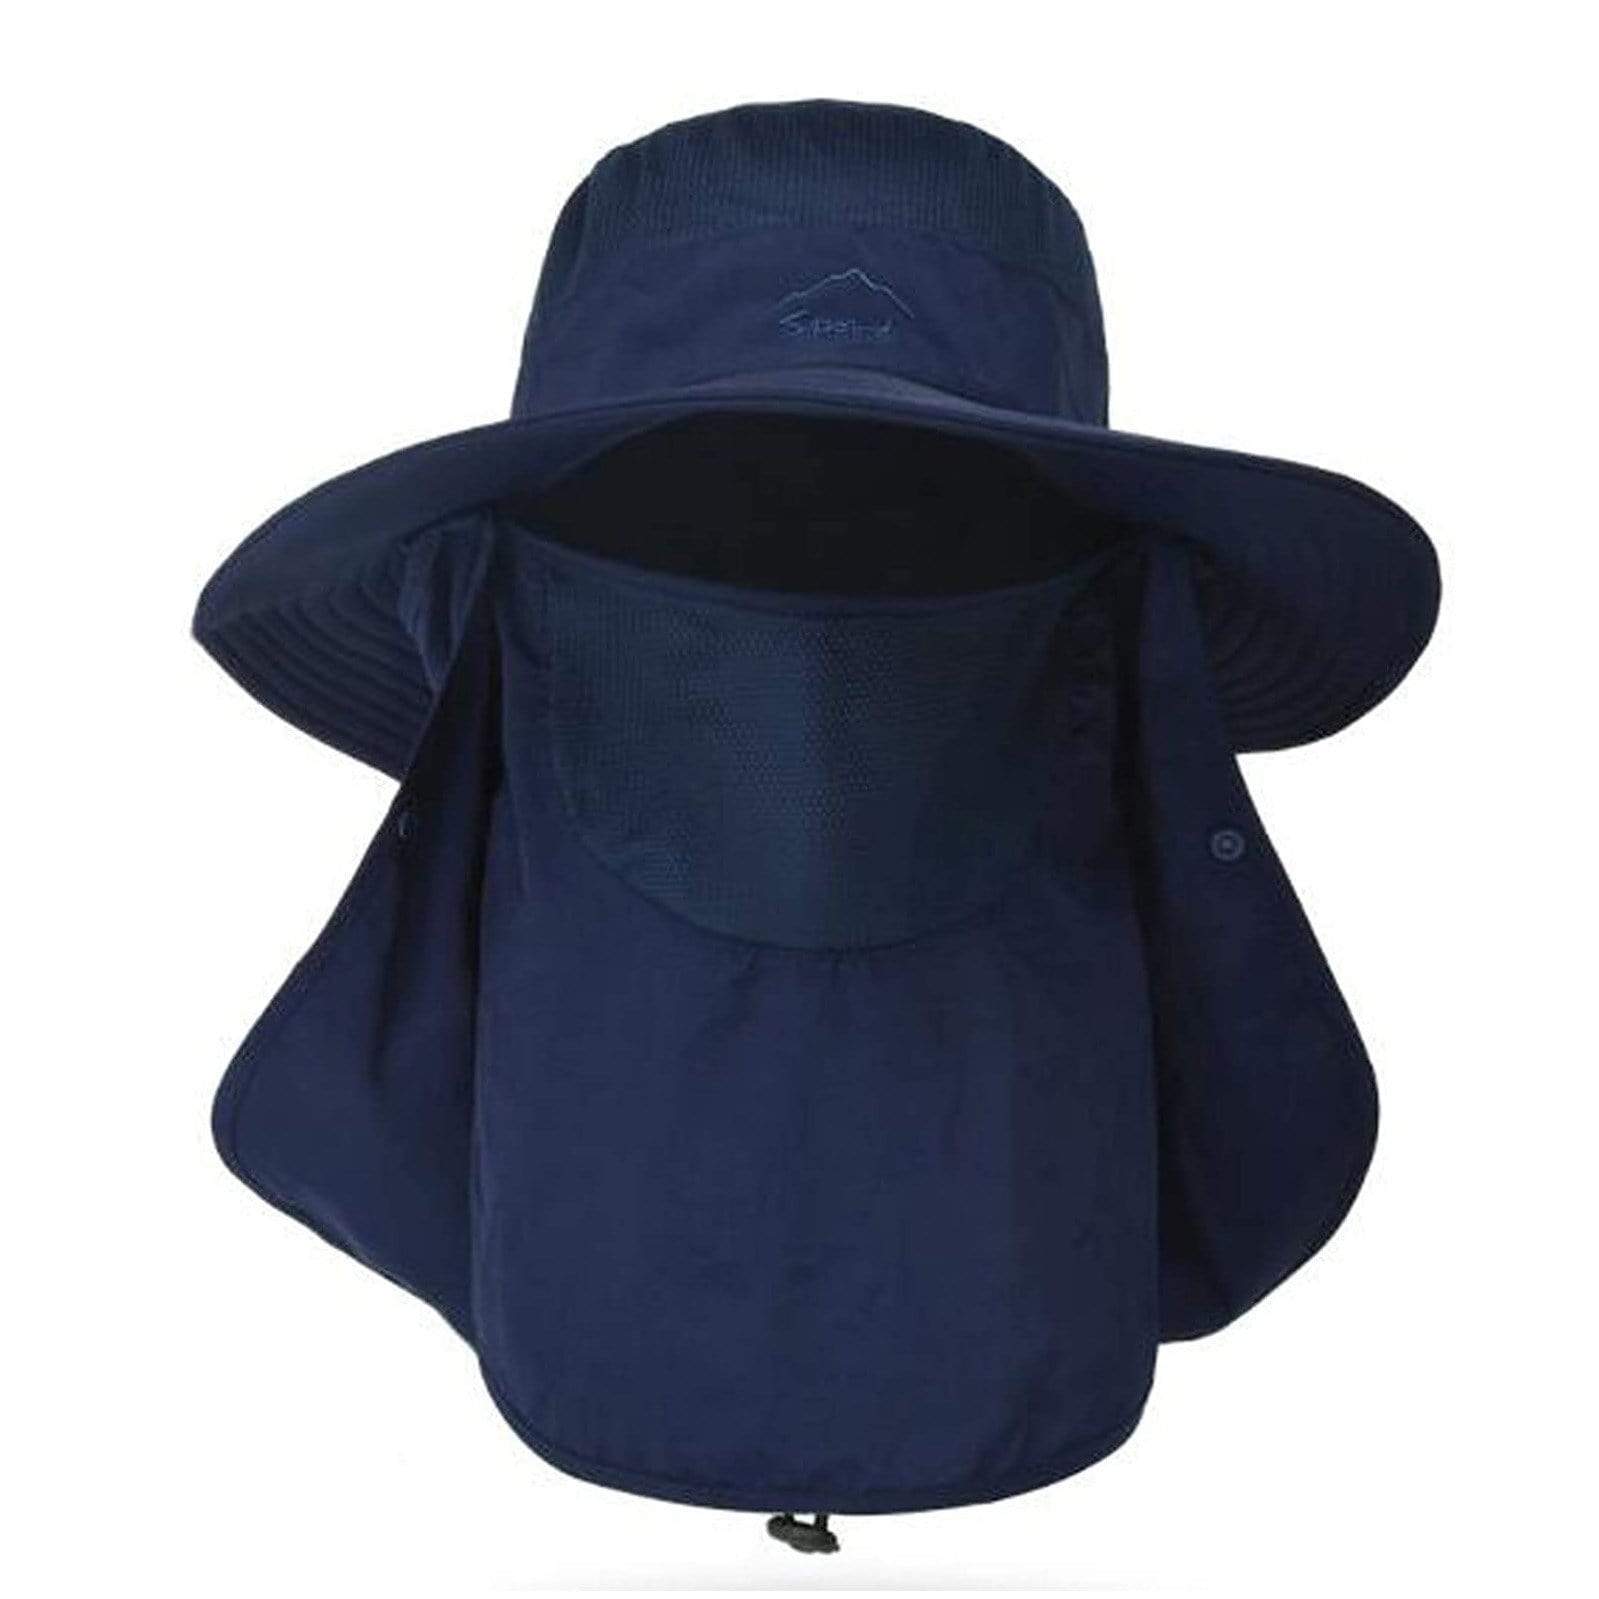 MIERSPORT Fishing Hat Sun Cap with Removable Face Neck Cover, Dark Blue